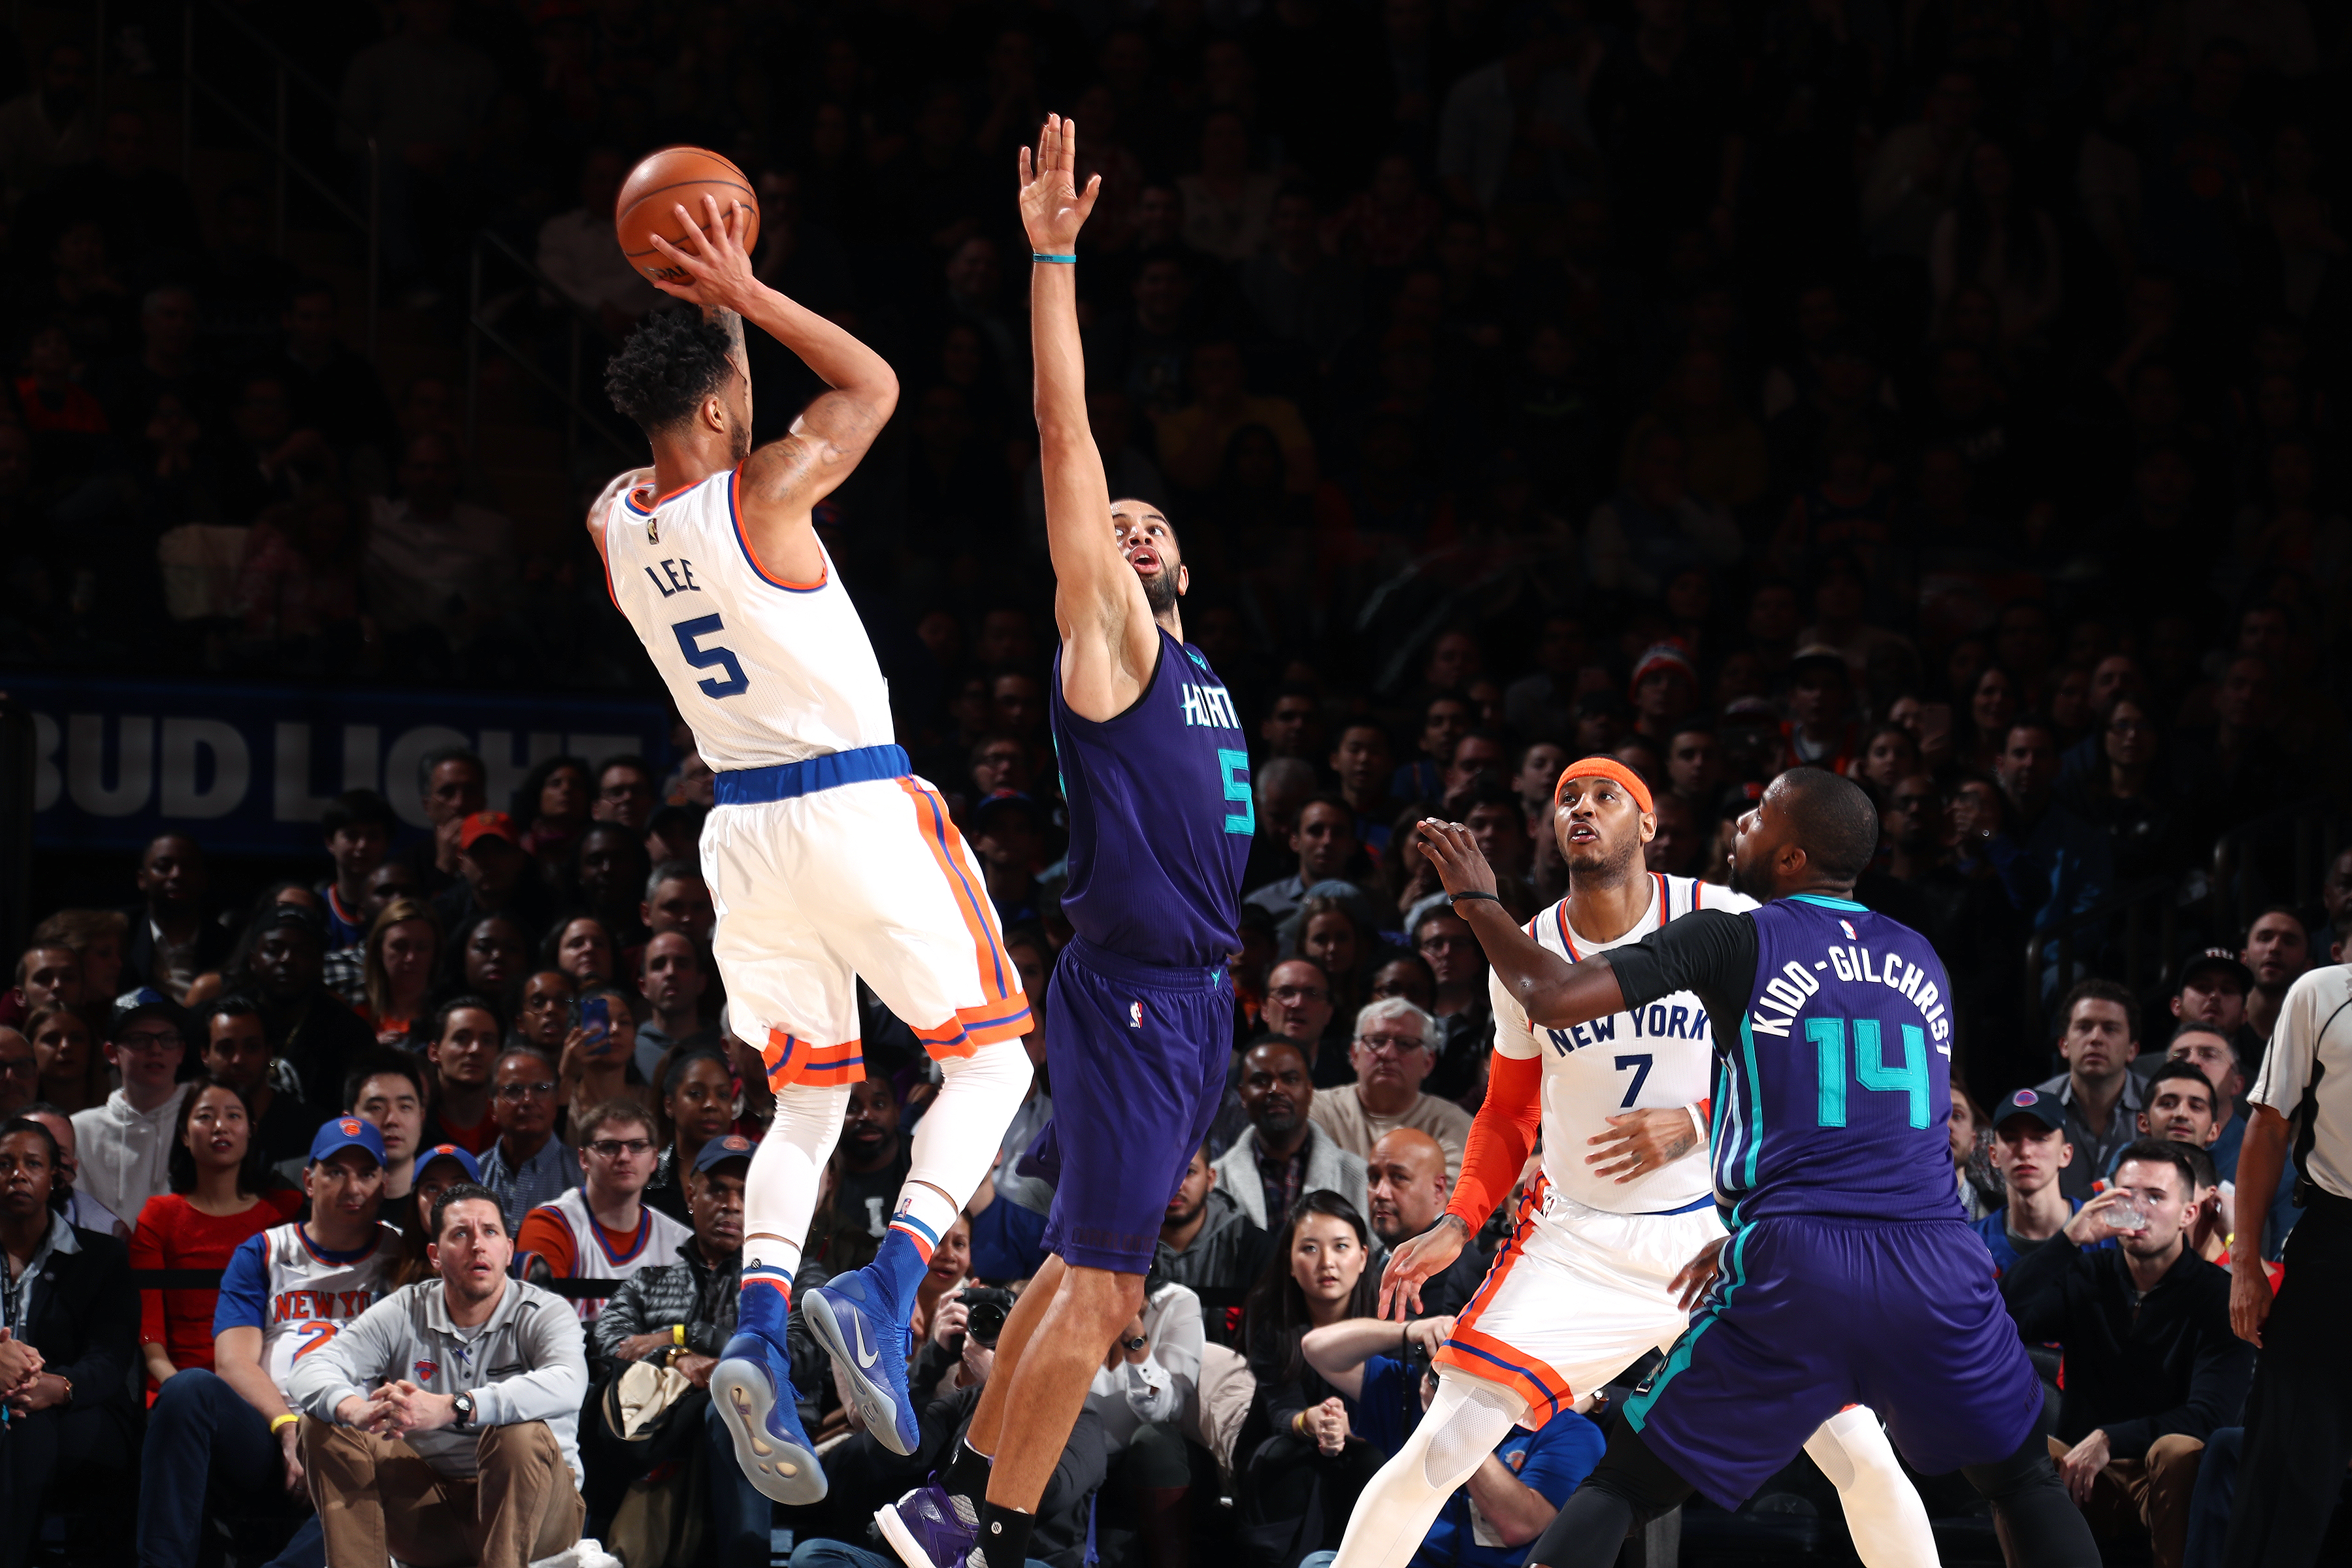 NEW YORK, NY - JANUARY 27: Courtney Lee #5 of the New York Knicks shoots the ball during the game against the Charlotte Hornets on January 27, 2017 at Madison Square Garden in New York City, New York. NOTE TO USER: User expressly acknowledges and agrees that, by downloading and or using this photograph, User is consenting to the terms and conditions of the Getty Images License Agreement. Mandatory Copyright Notice: Copyright 2017 NBAE (Photo by Nathaniel S. Butler/NBAE via Getty Images)